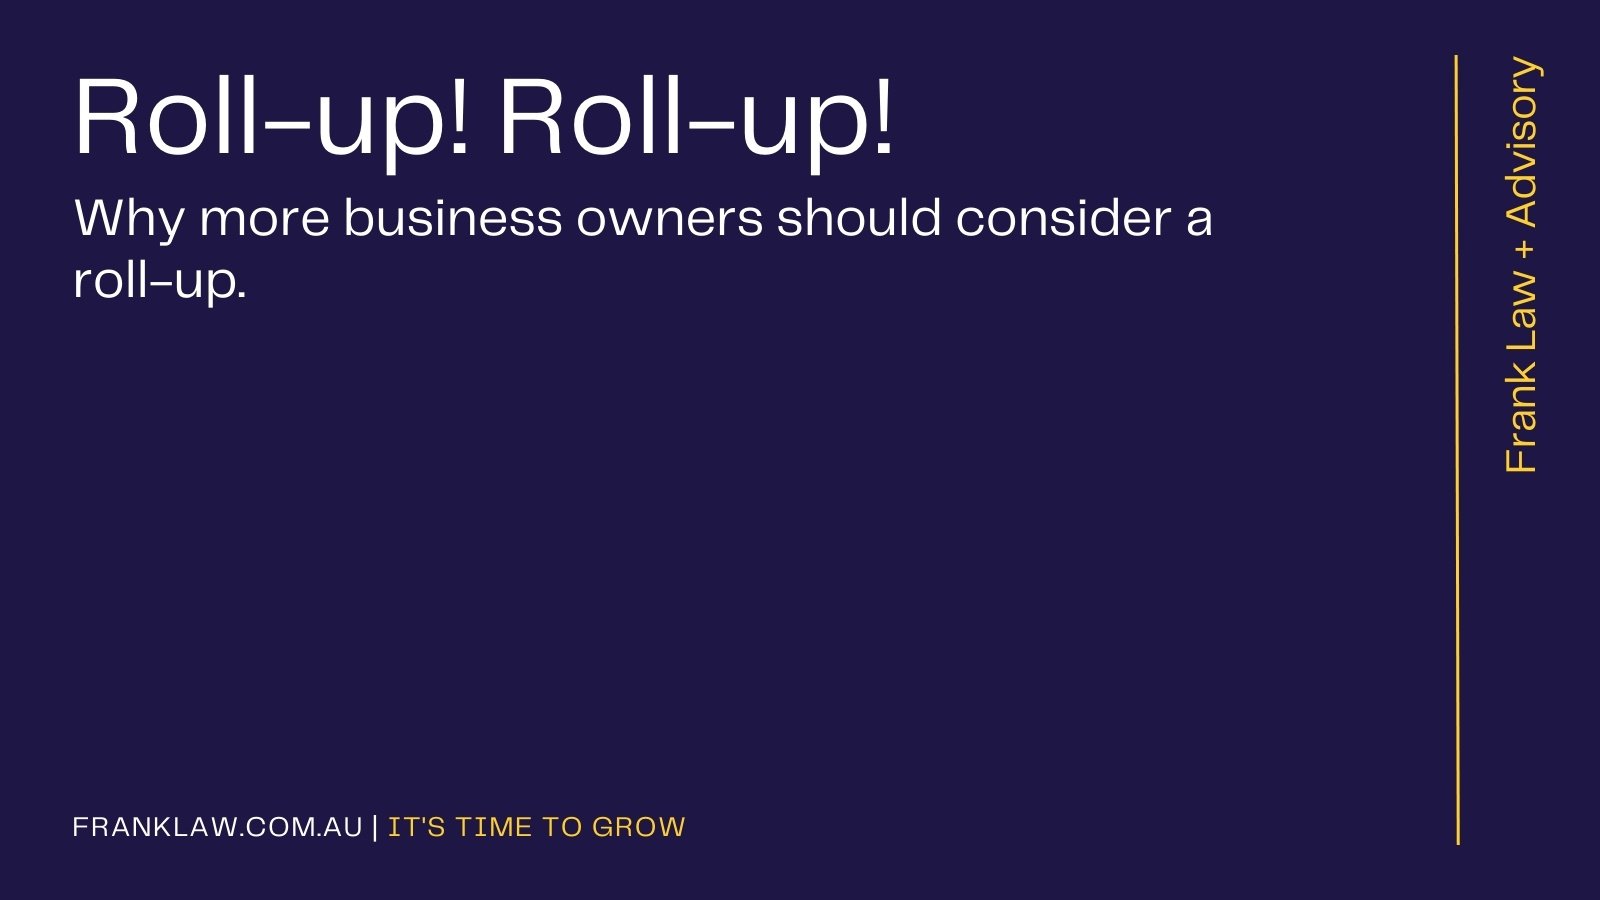 Roll-up Roll-up. Why more founders should consider a roll-up strategy. 